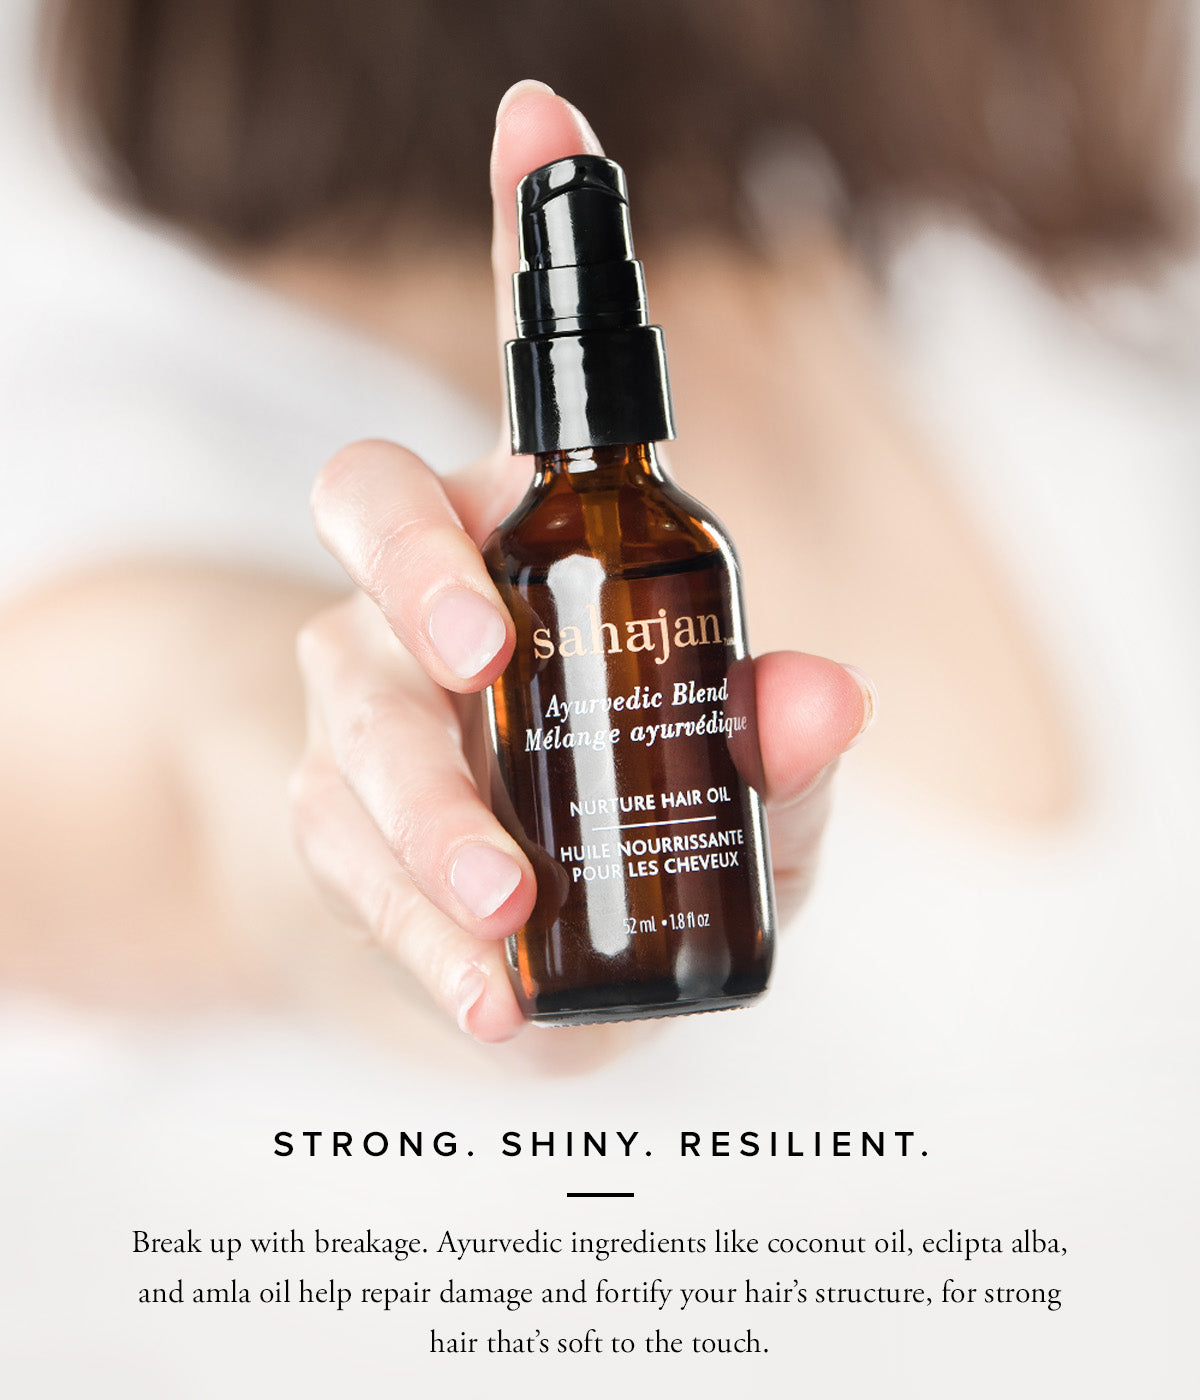 To restore shine and strength for all hair types, use Nurture Hair Oil daily. Just apply 1-2 pumps to wet or dry hair before styling or as a shine boost.